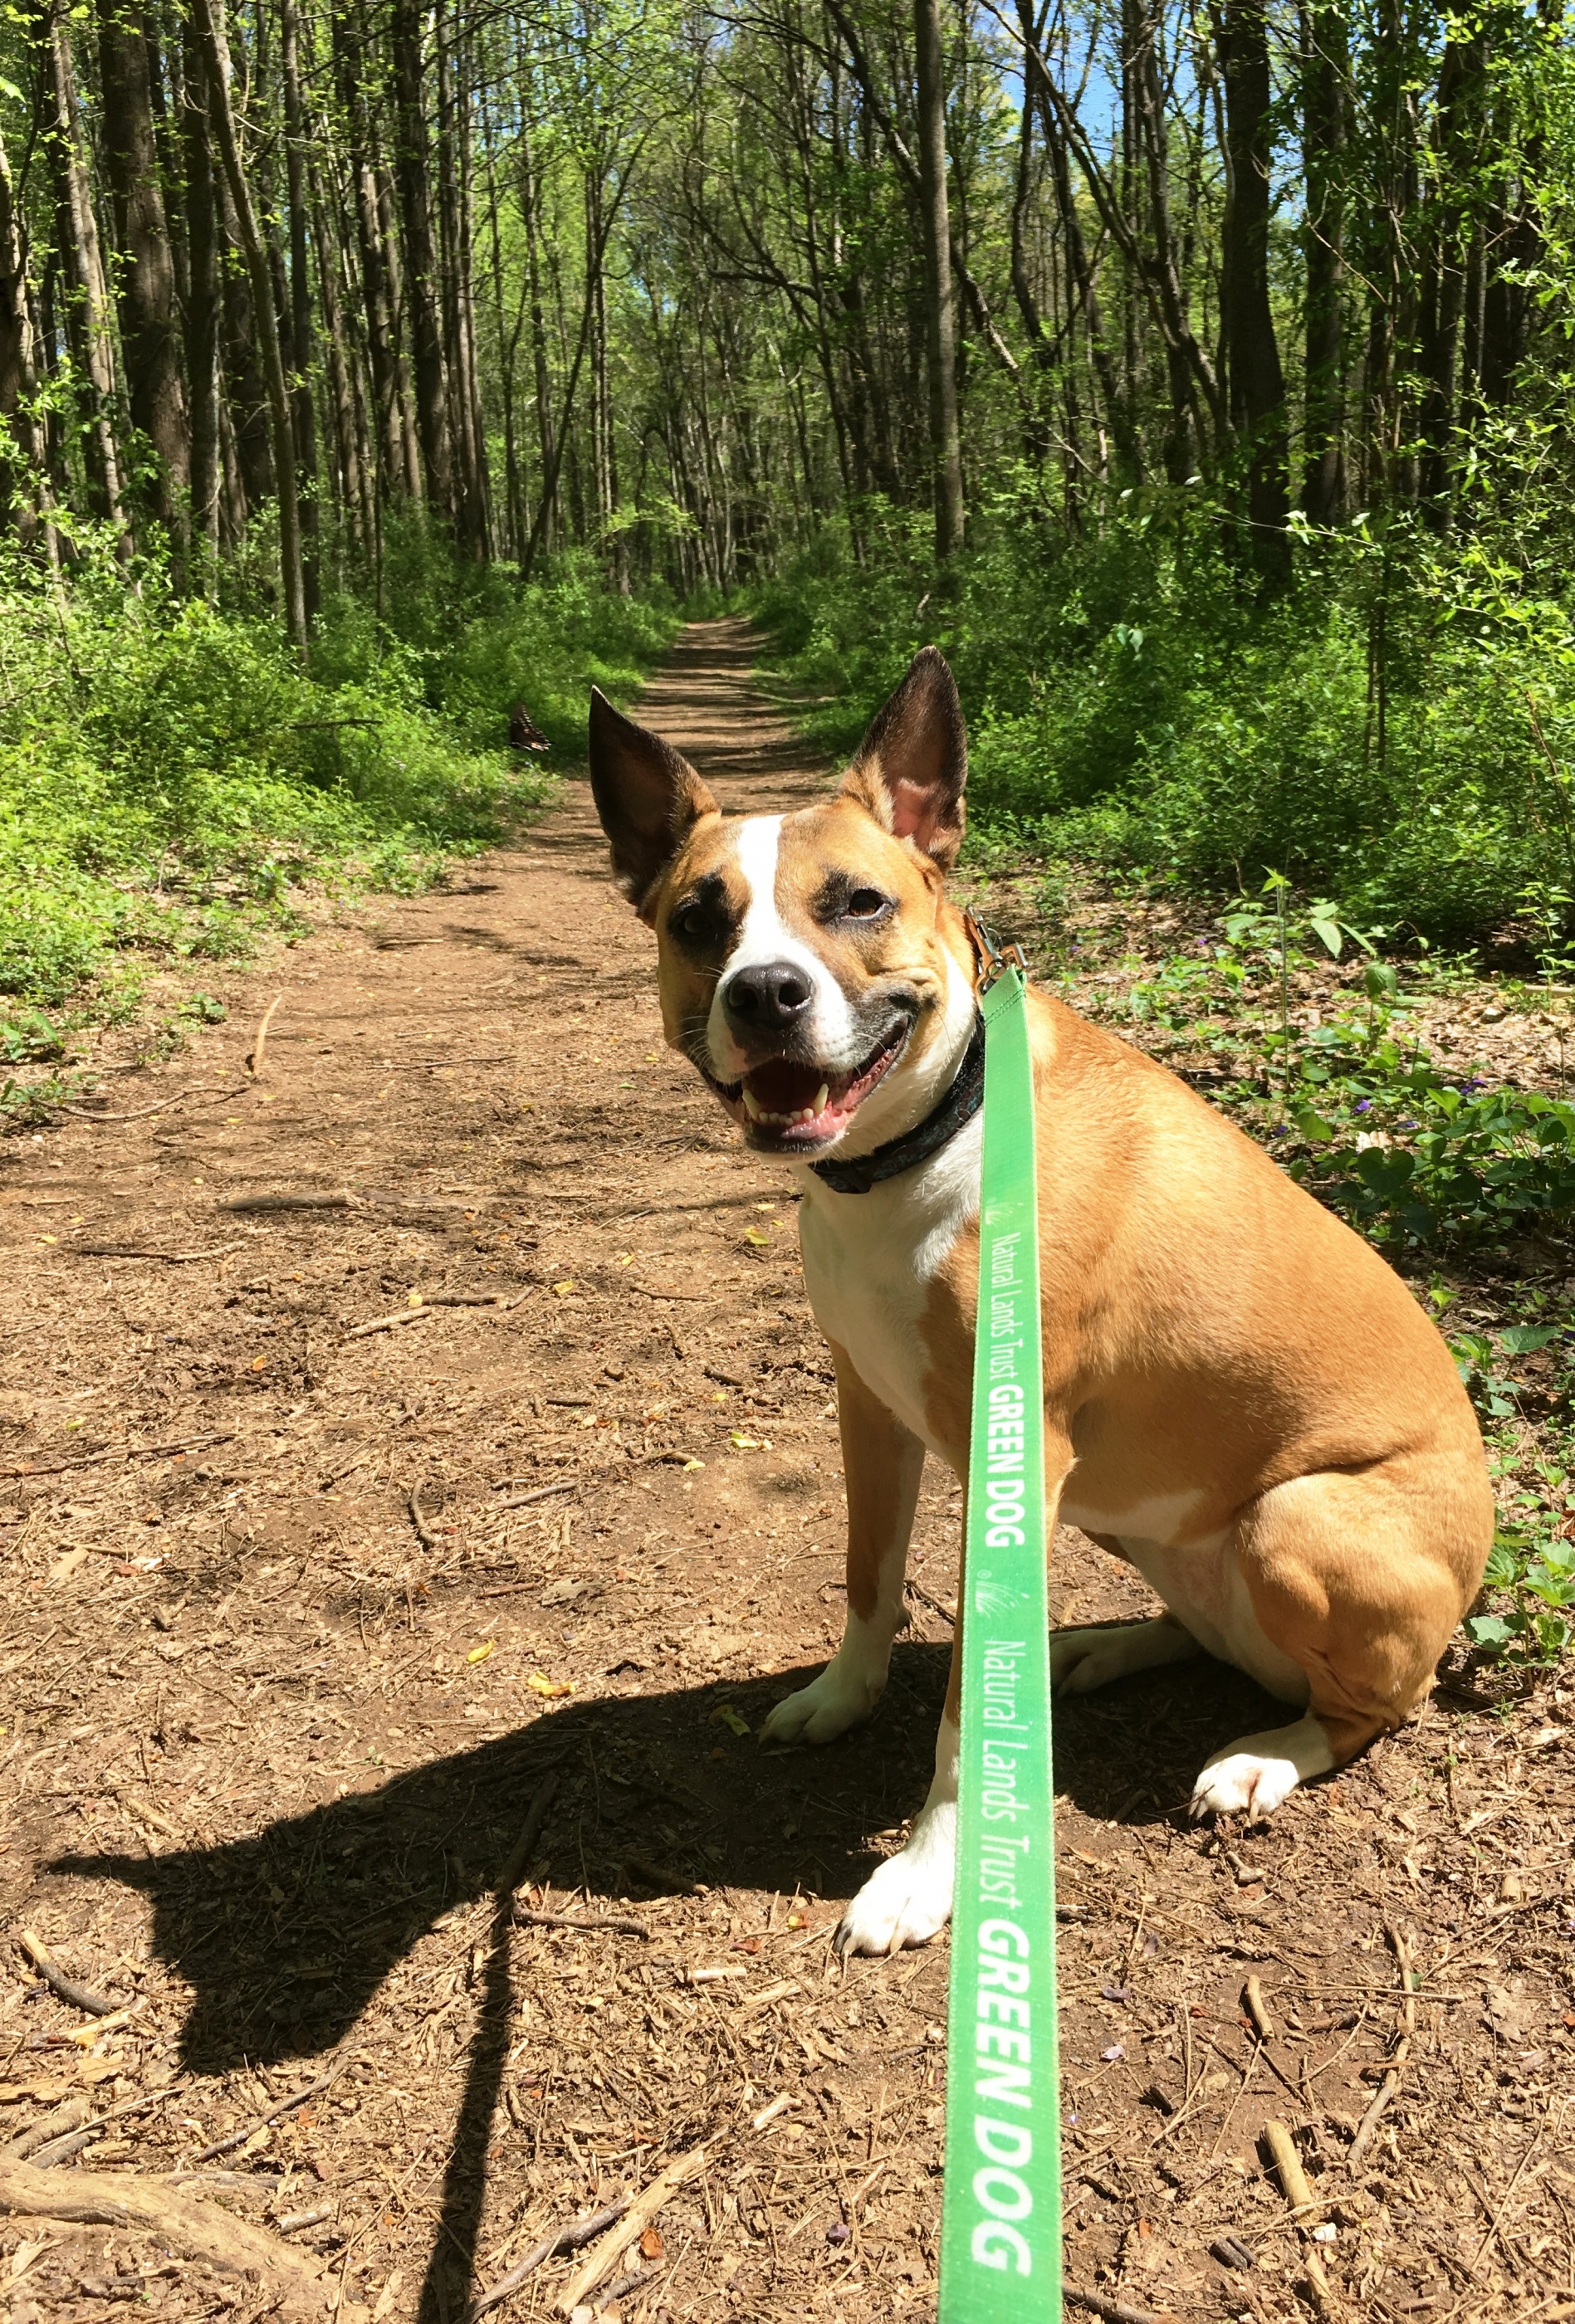 A dog on a green leash sitting on a dirt trail through the woods.